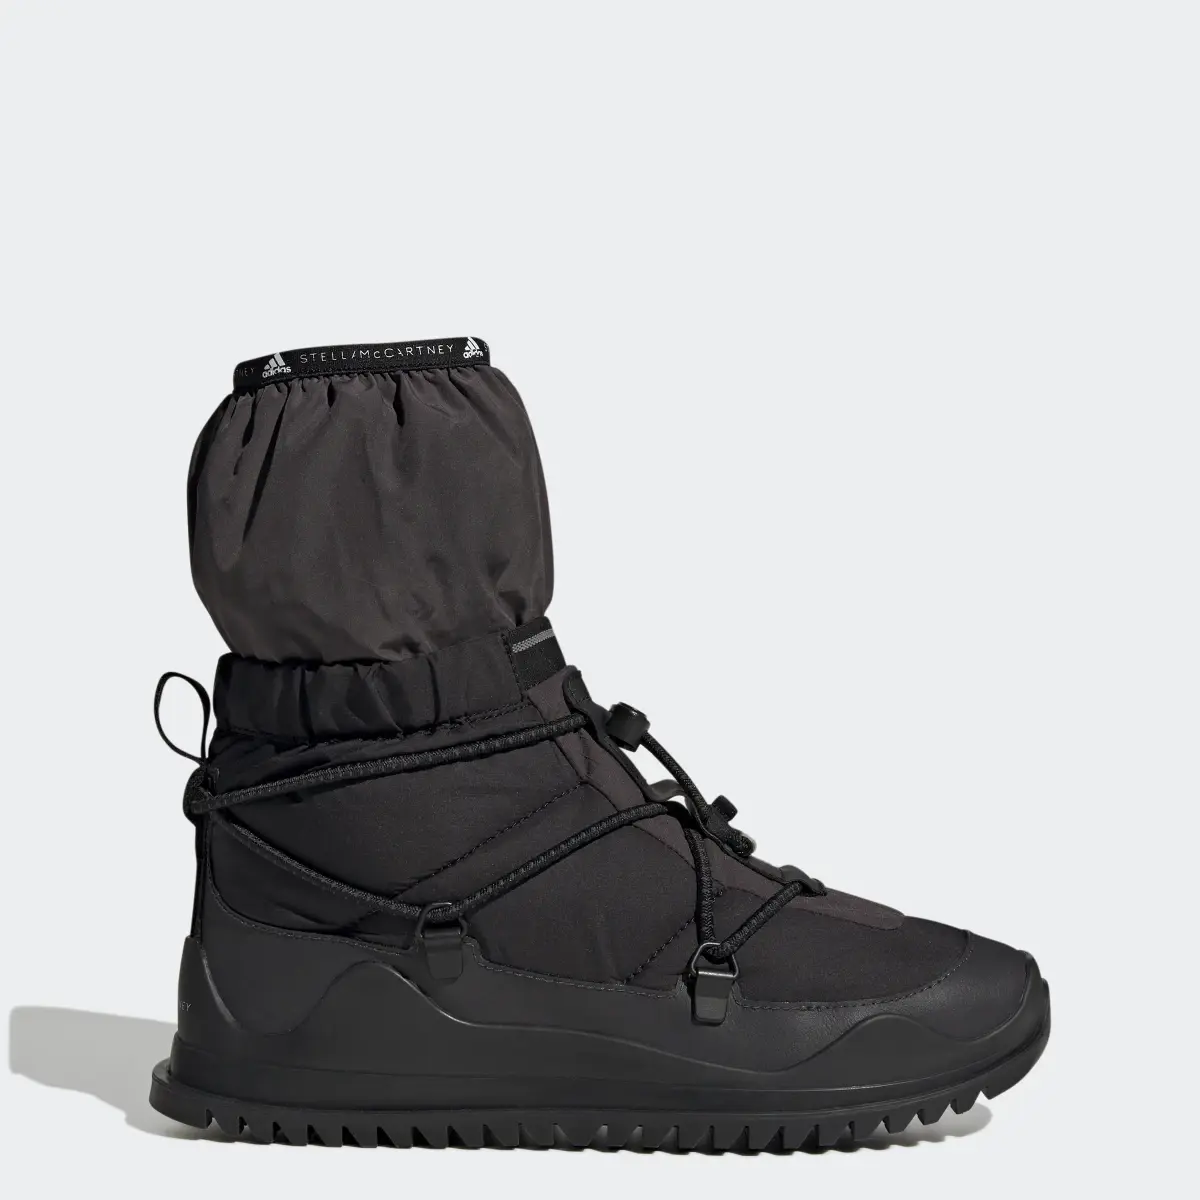 Adidas by Stella McCartney Winter COLD.RDY Boot. 1